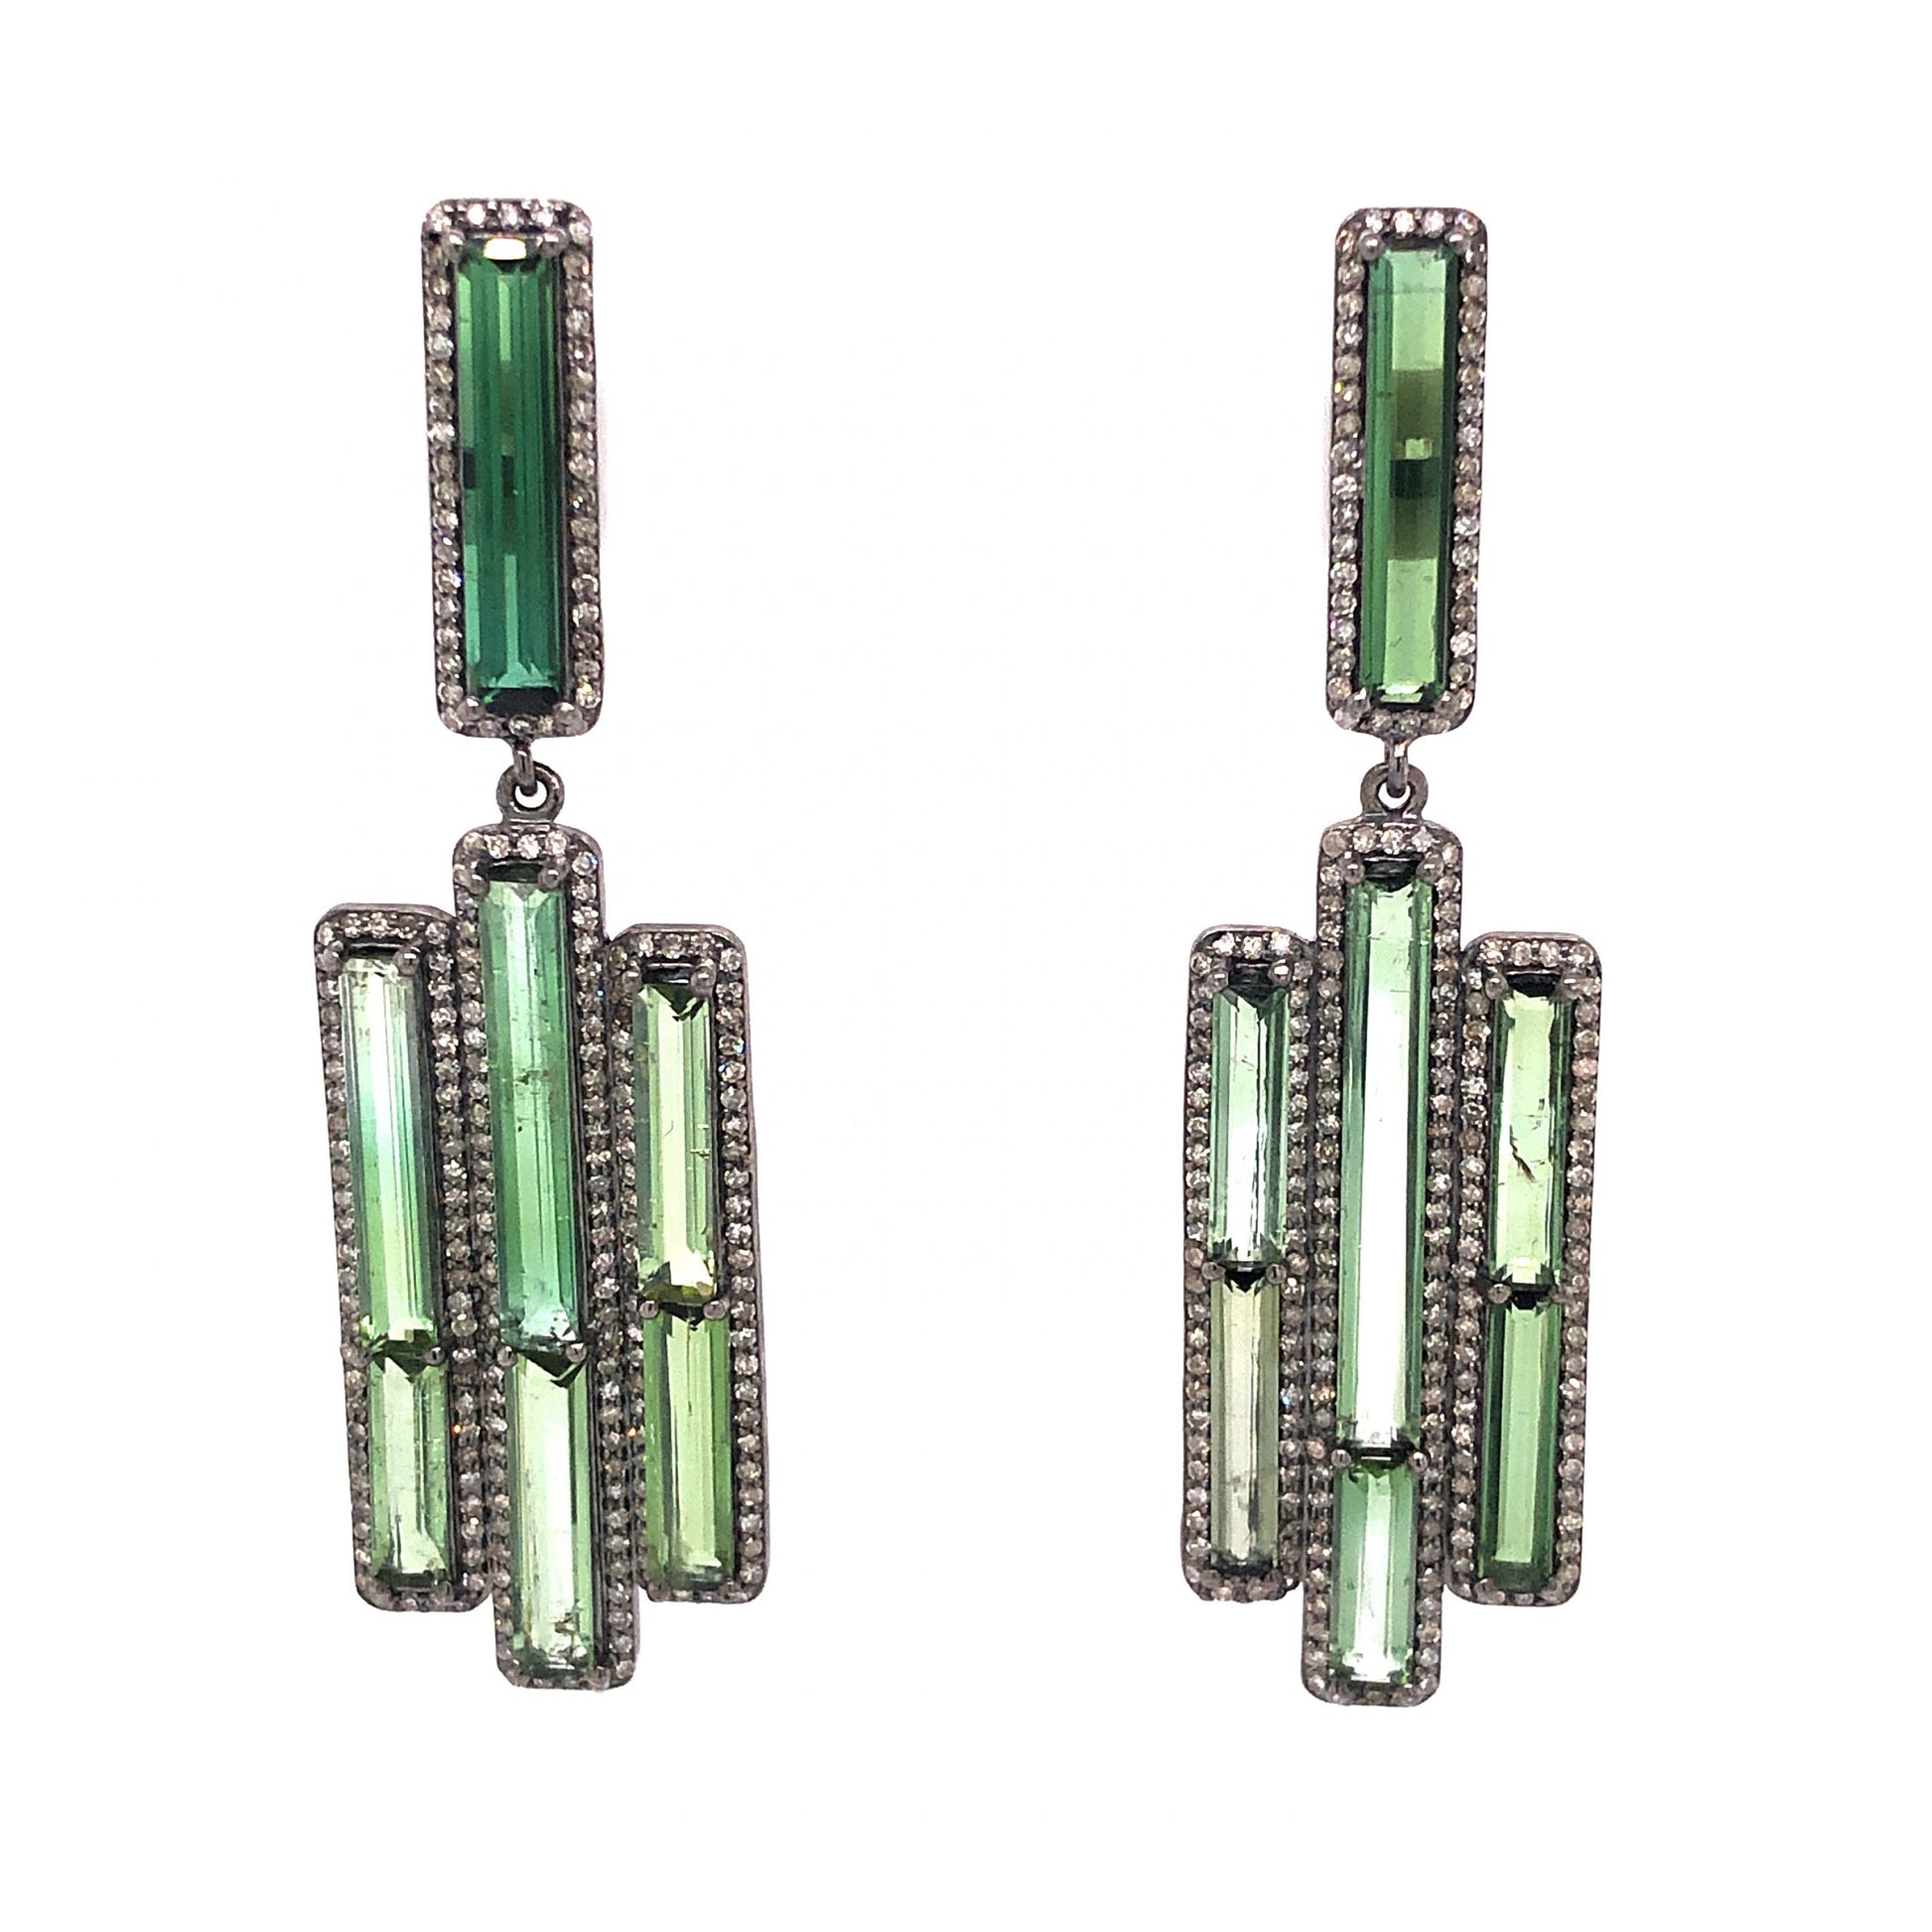 Green Tourmaline & Pave Diamond Drop Earrings in Sterling SilverComposition: Sterling Silver/14 Karat Yellow GoldTotal Diamond Weight: 1.38 ctTotal Gram Weight: 15.2 g